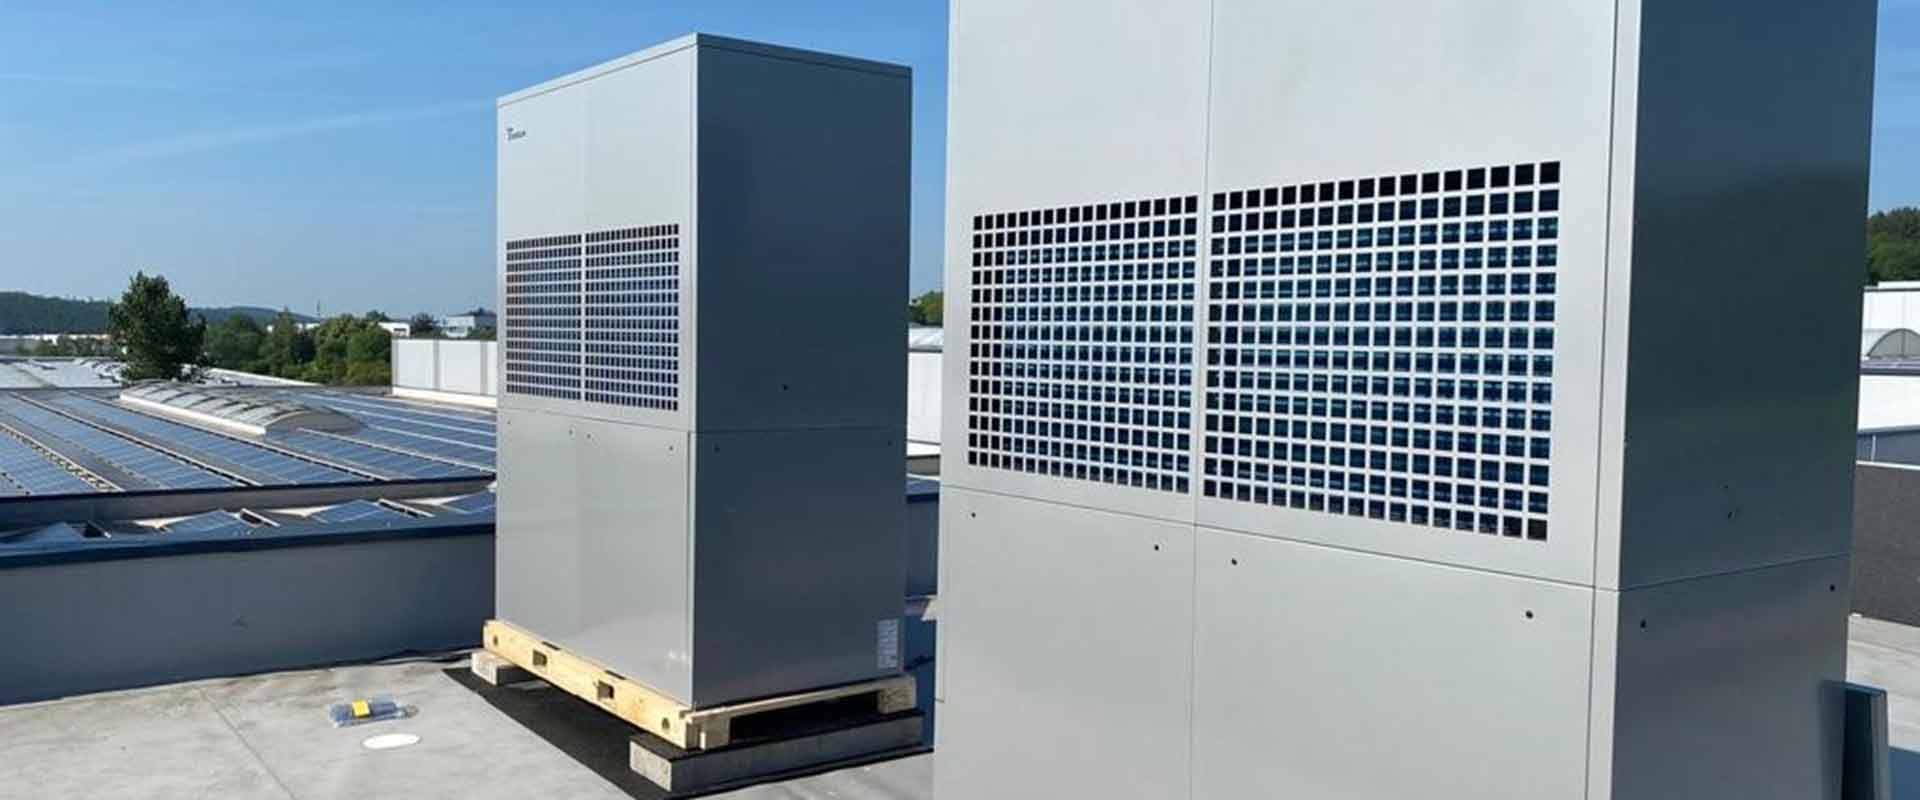 Two LAP heat pumps were photographed diagonally from the right, on the top of a flat factory roof with photovoltaic panels. In the background, blue and cloudless sky can be seen.